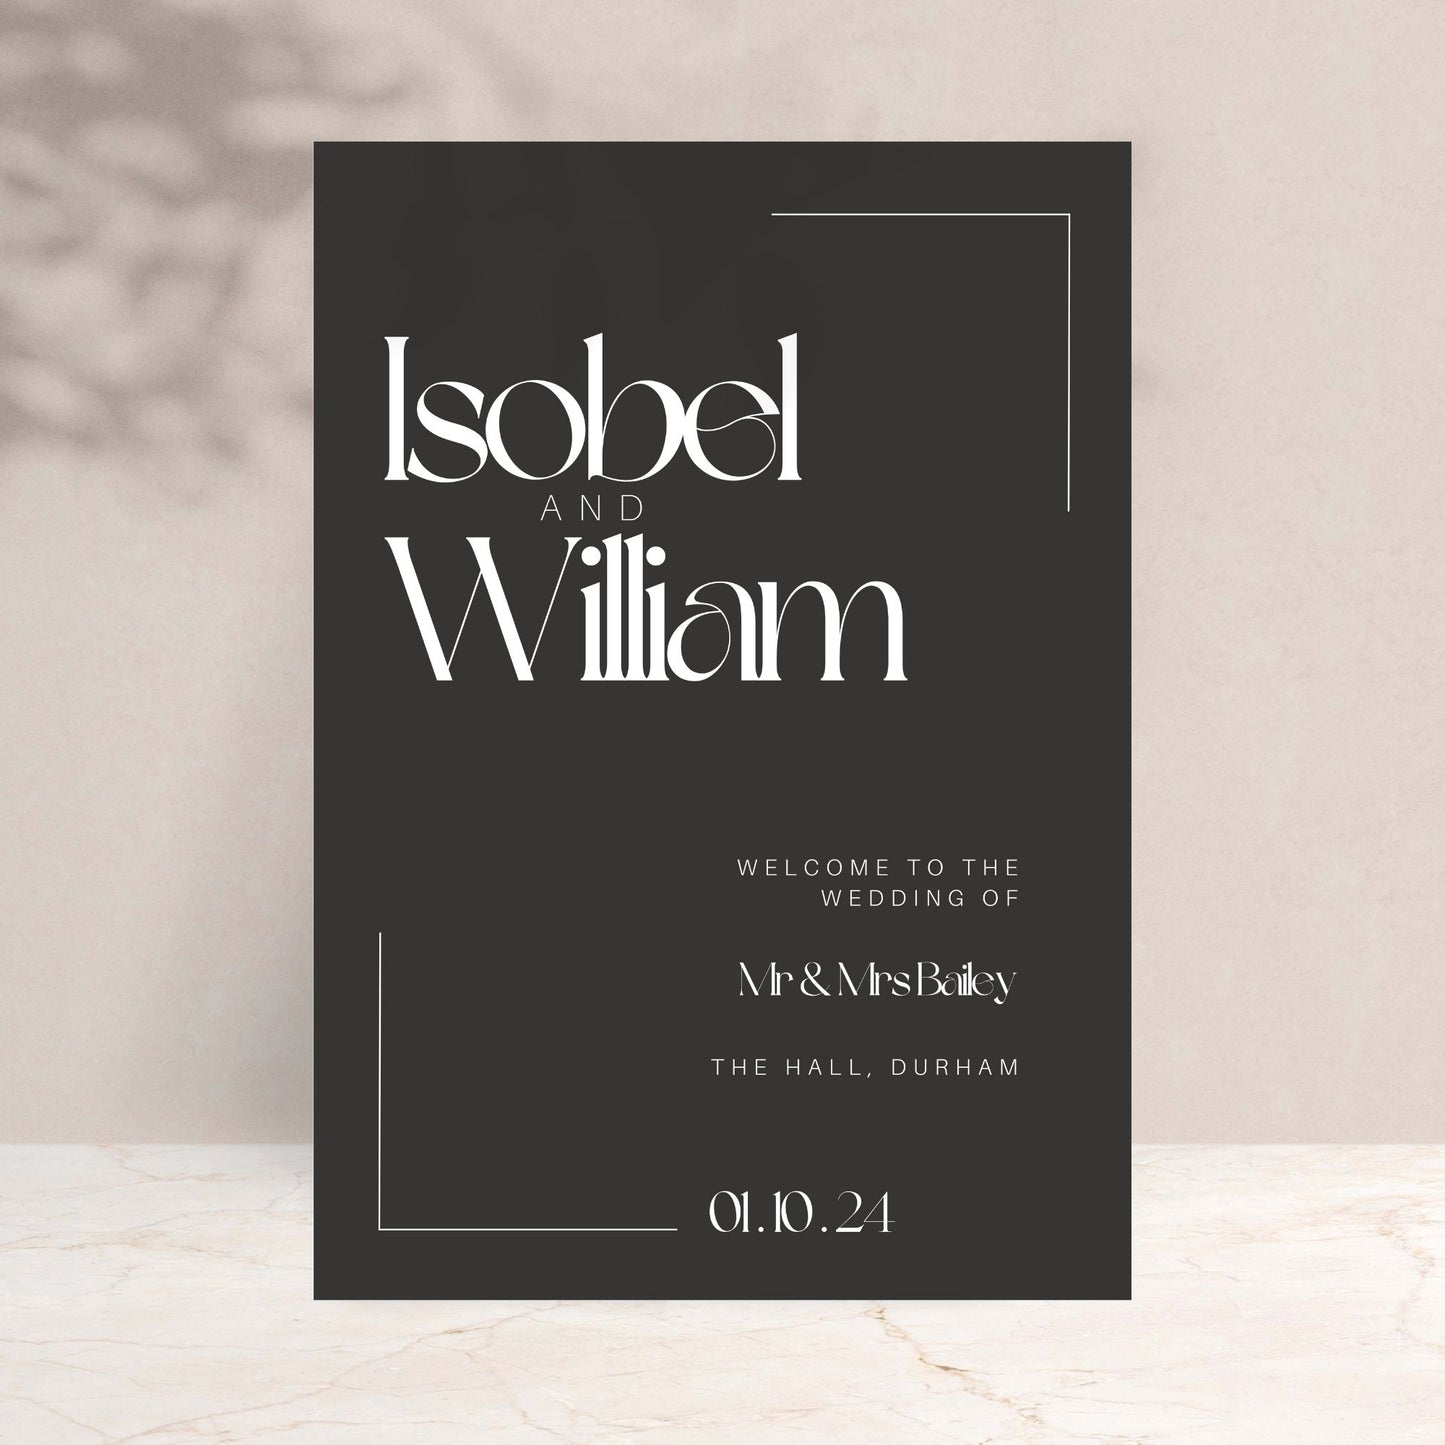 ISOBEL Wedding Welcome Sign - Wedding Ceremony Stationery available at The Ivy Collection | Luxury Wedding Stationery